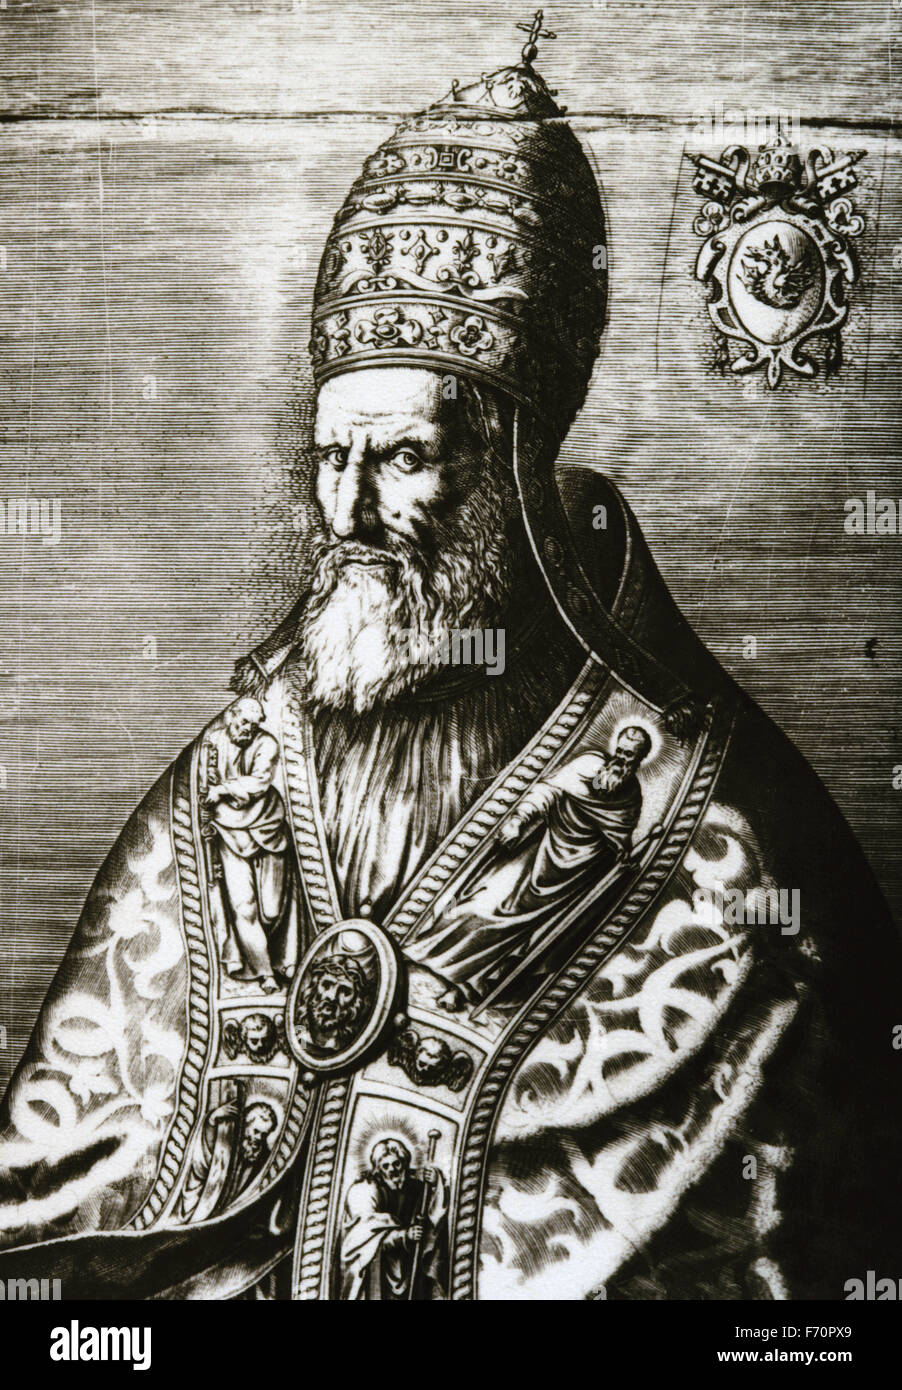 Pope Gregory Xiii High Resolution Stock Photography and Images - Alamy